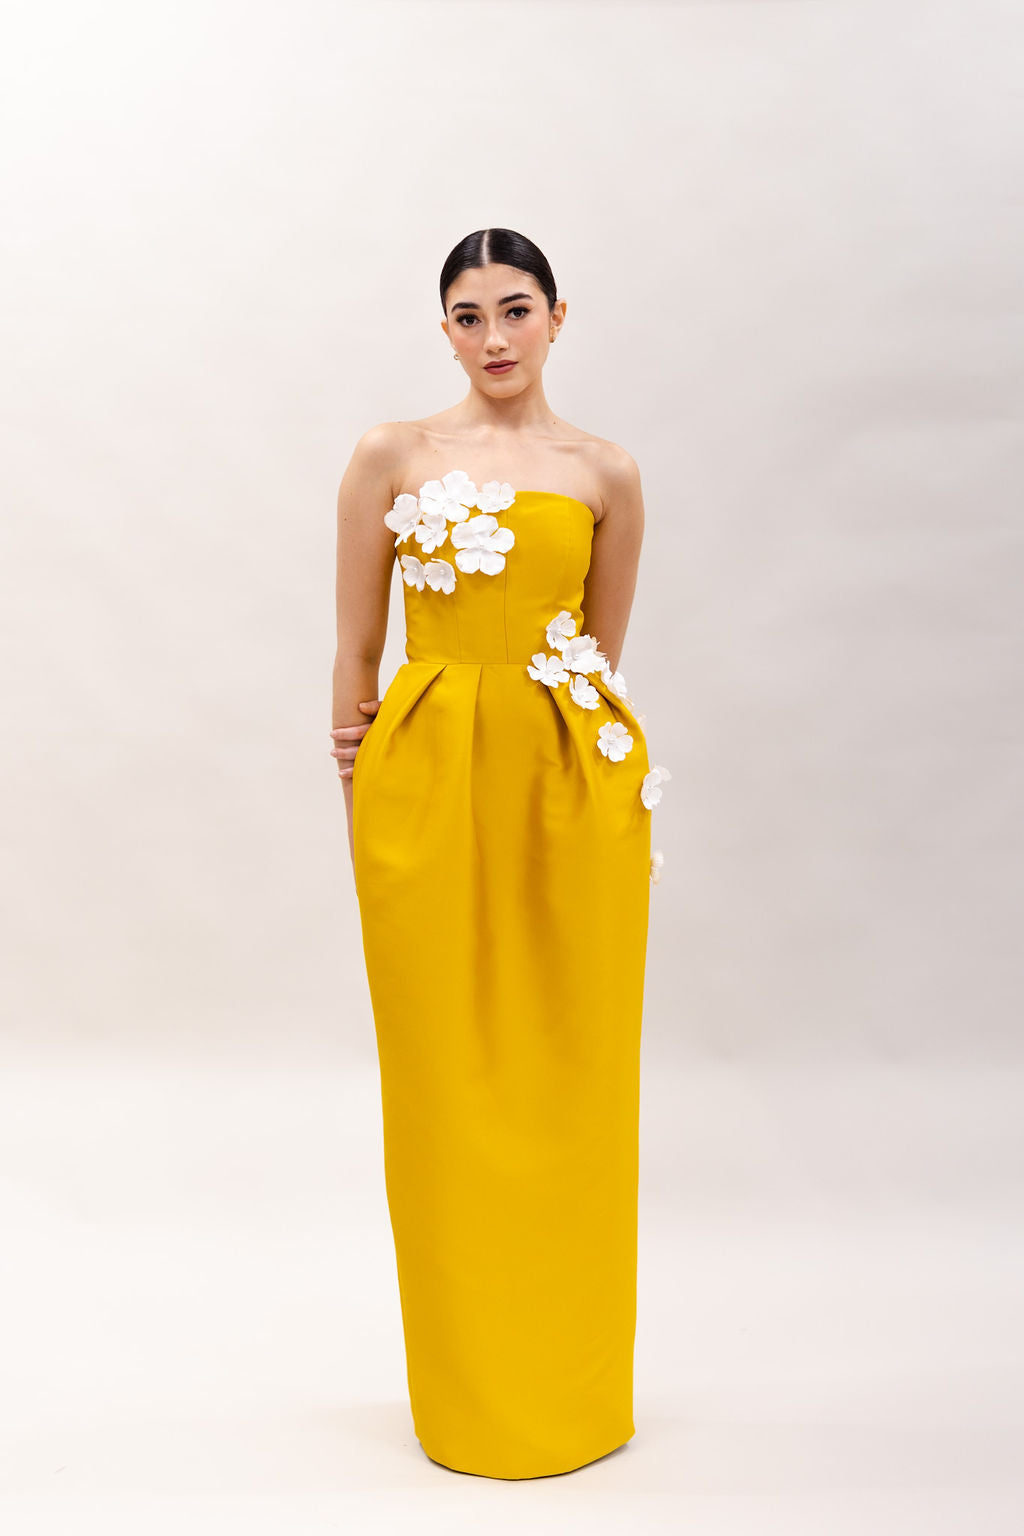 YELLOW PUFFY SKIRT WITH WHITE 3D FLORAL